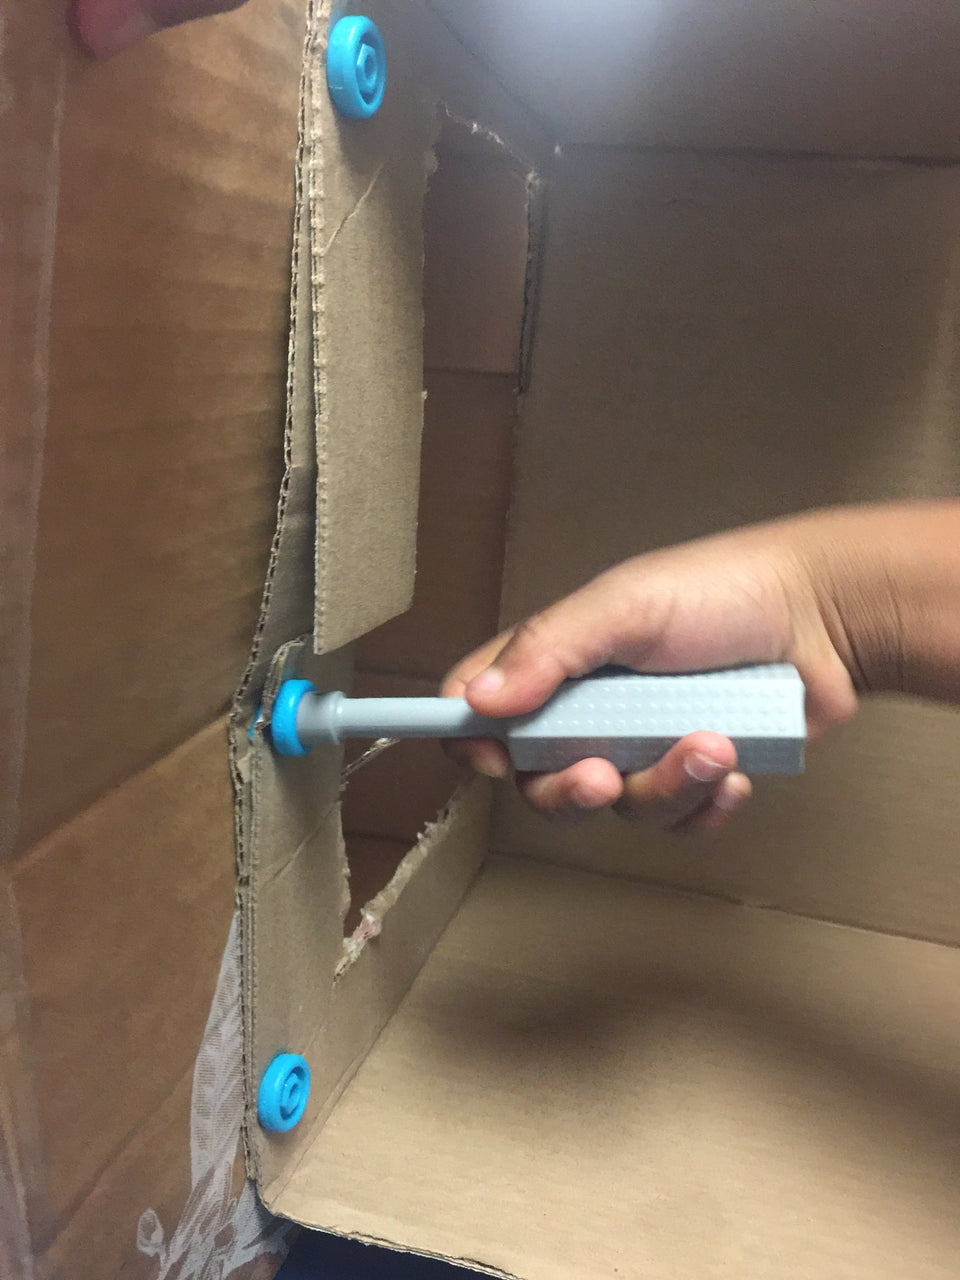 Makedo Scrudriver in action connecting cardboard easily.